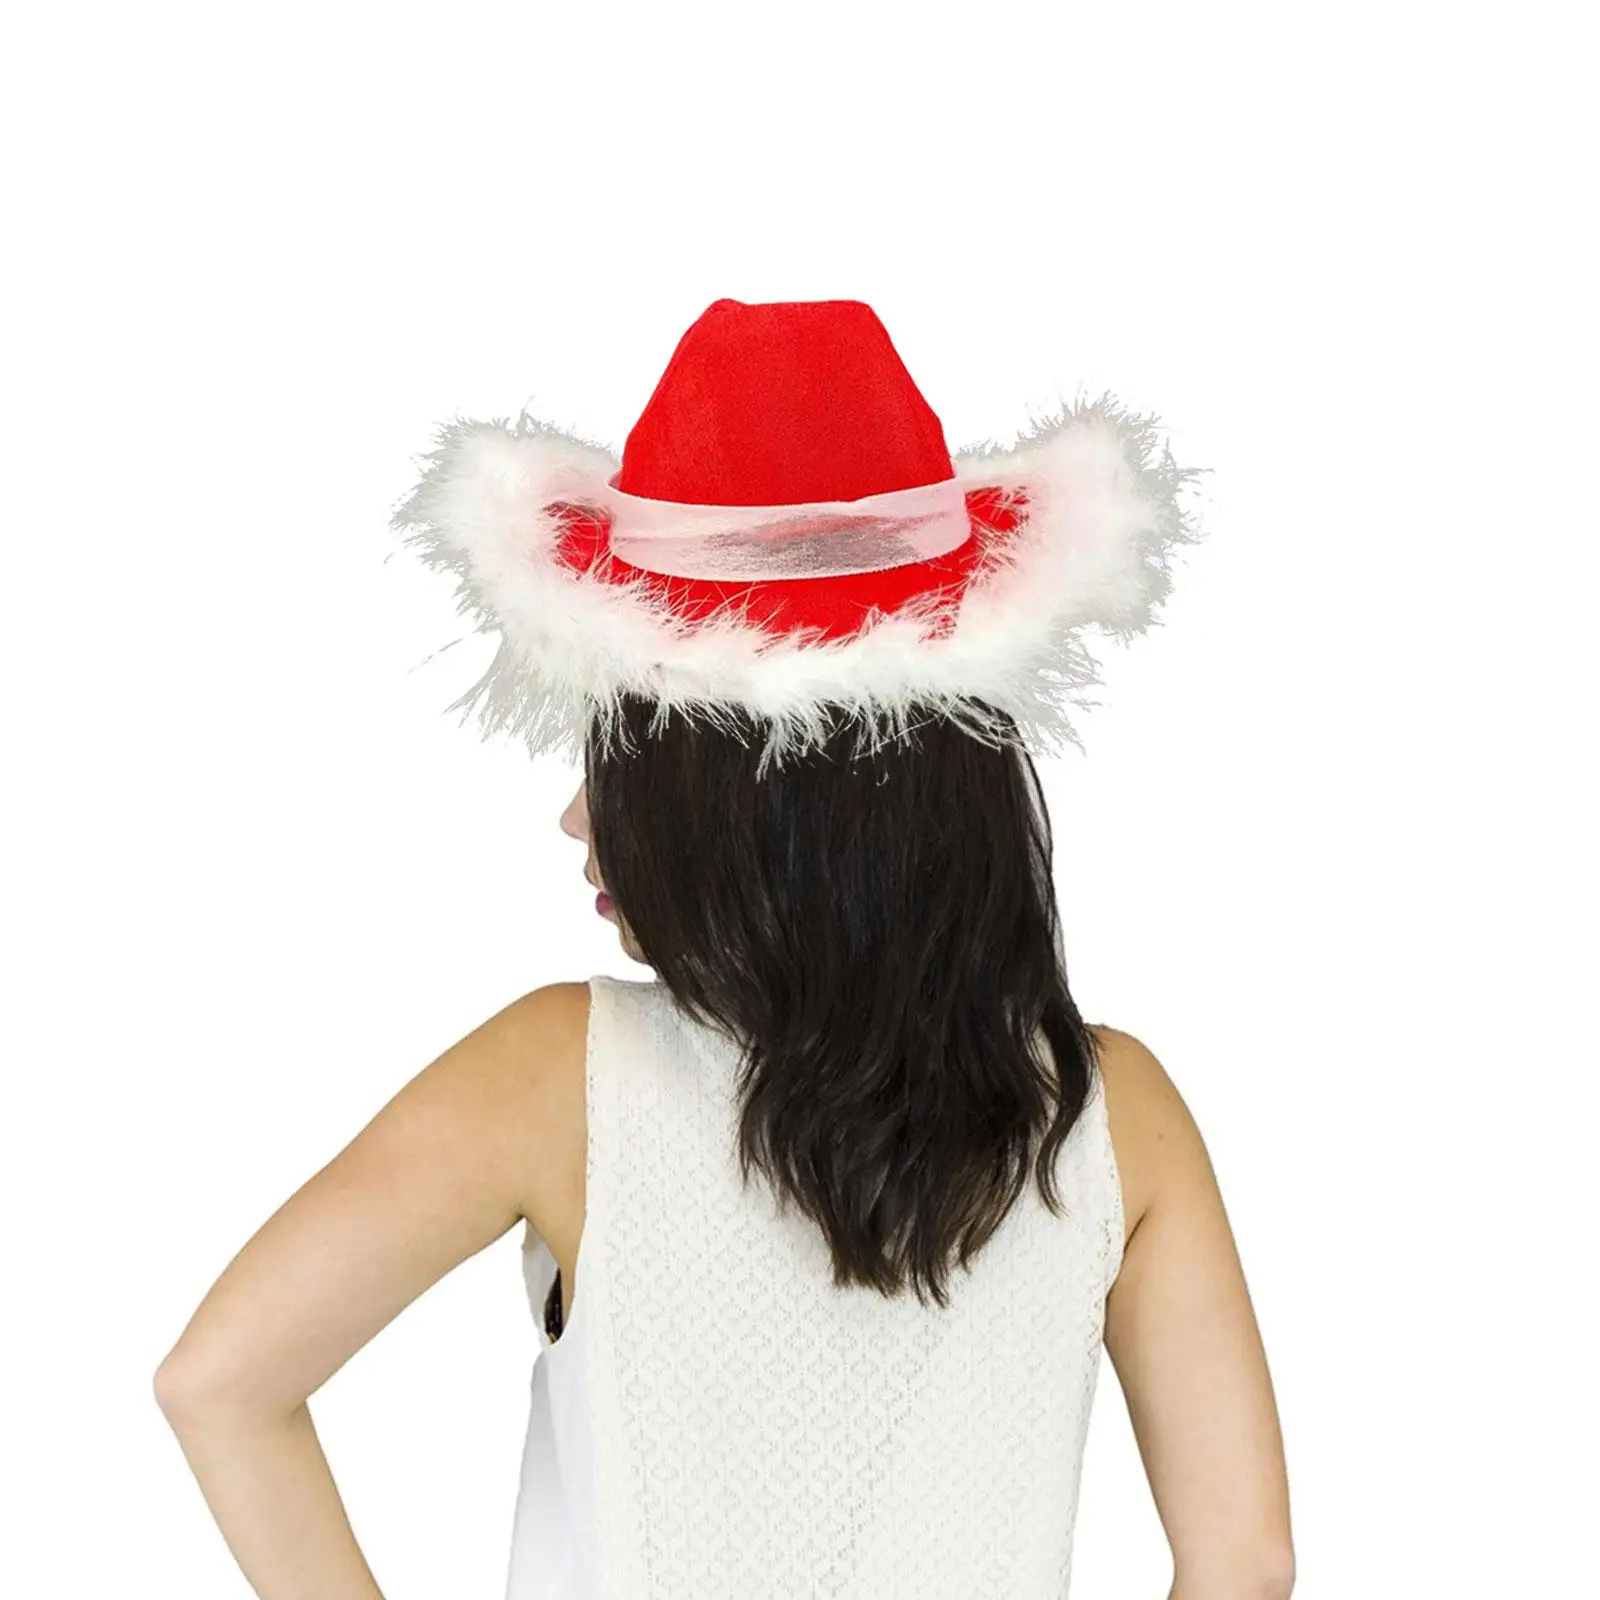 Red Cowboy Hat Western Wide Brim Supply with Feathers Cowgirl Hat for Christmas Party Costume Accessories Men Women Adult